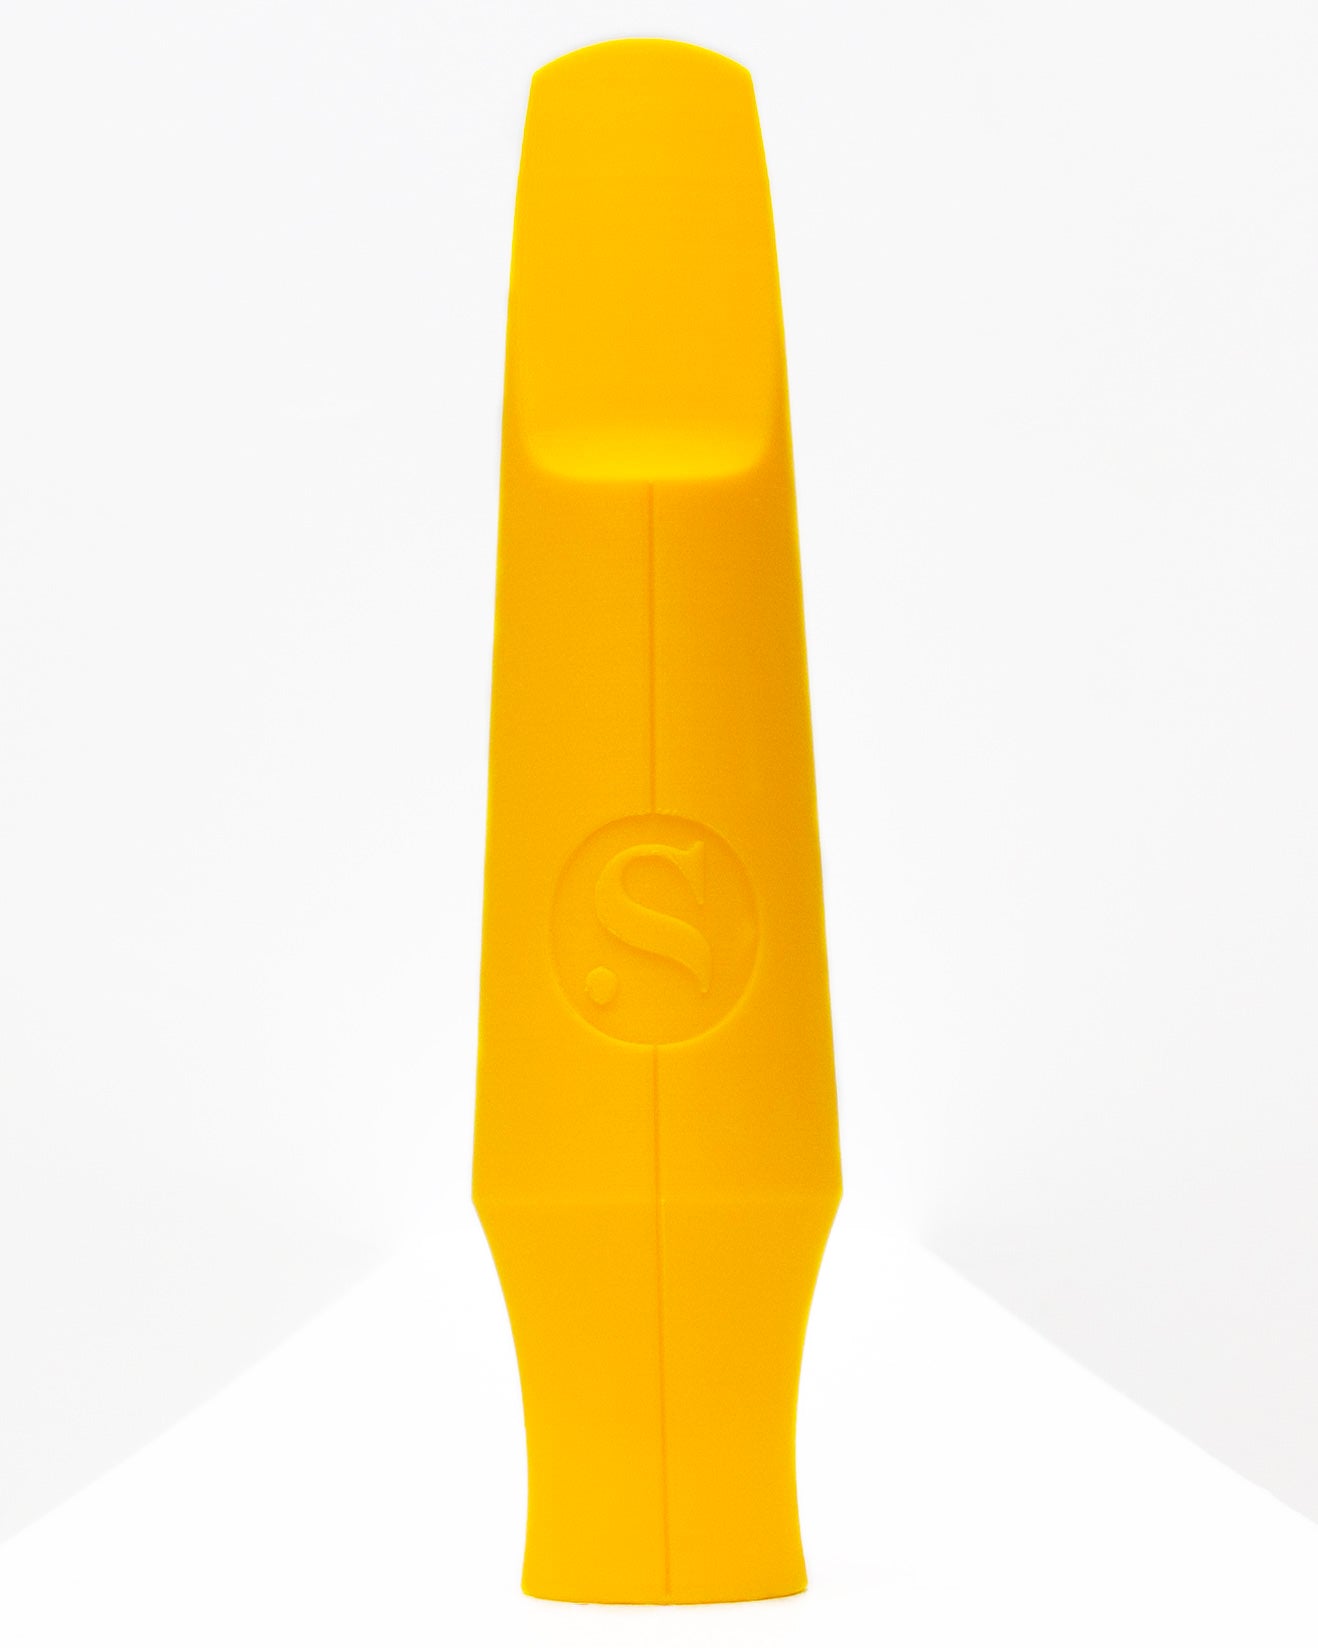 Baritone Signature Saxophone mouthpiece - Adrian Condis by Syos - 9 / Mellow Yellow